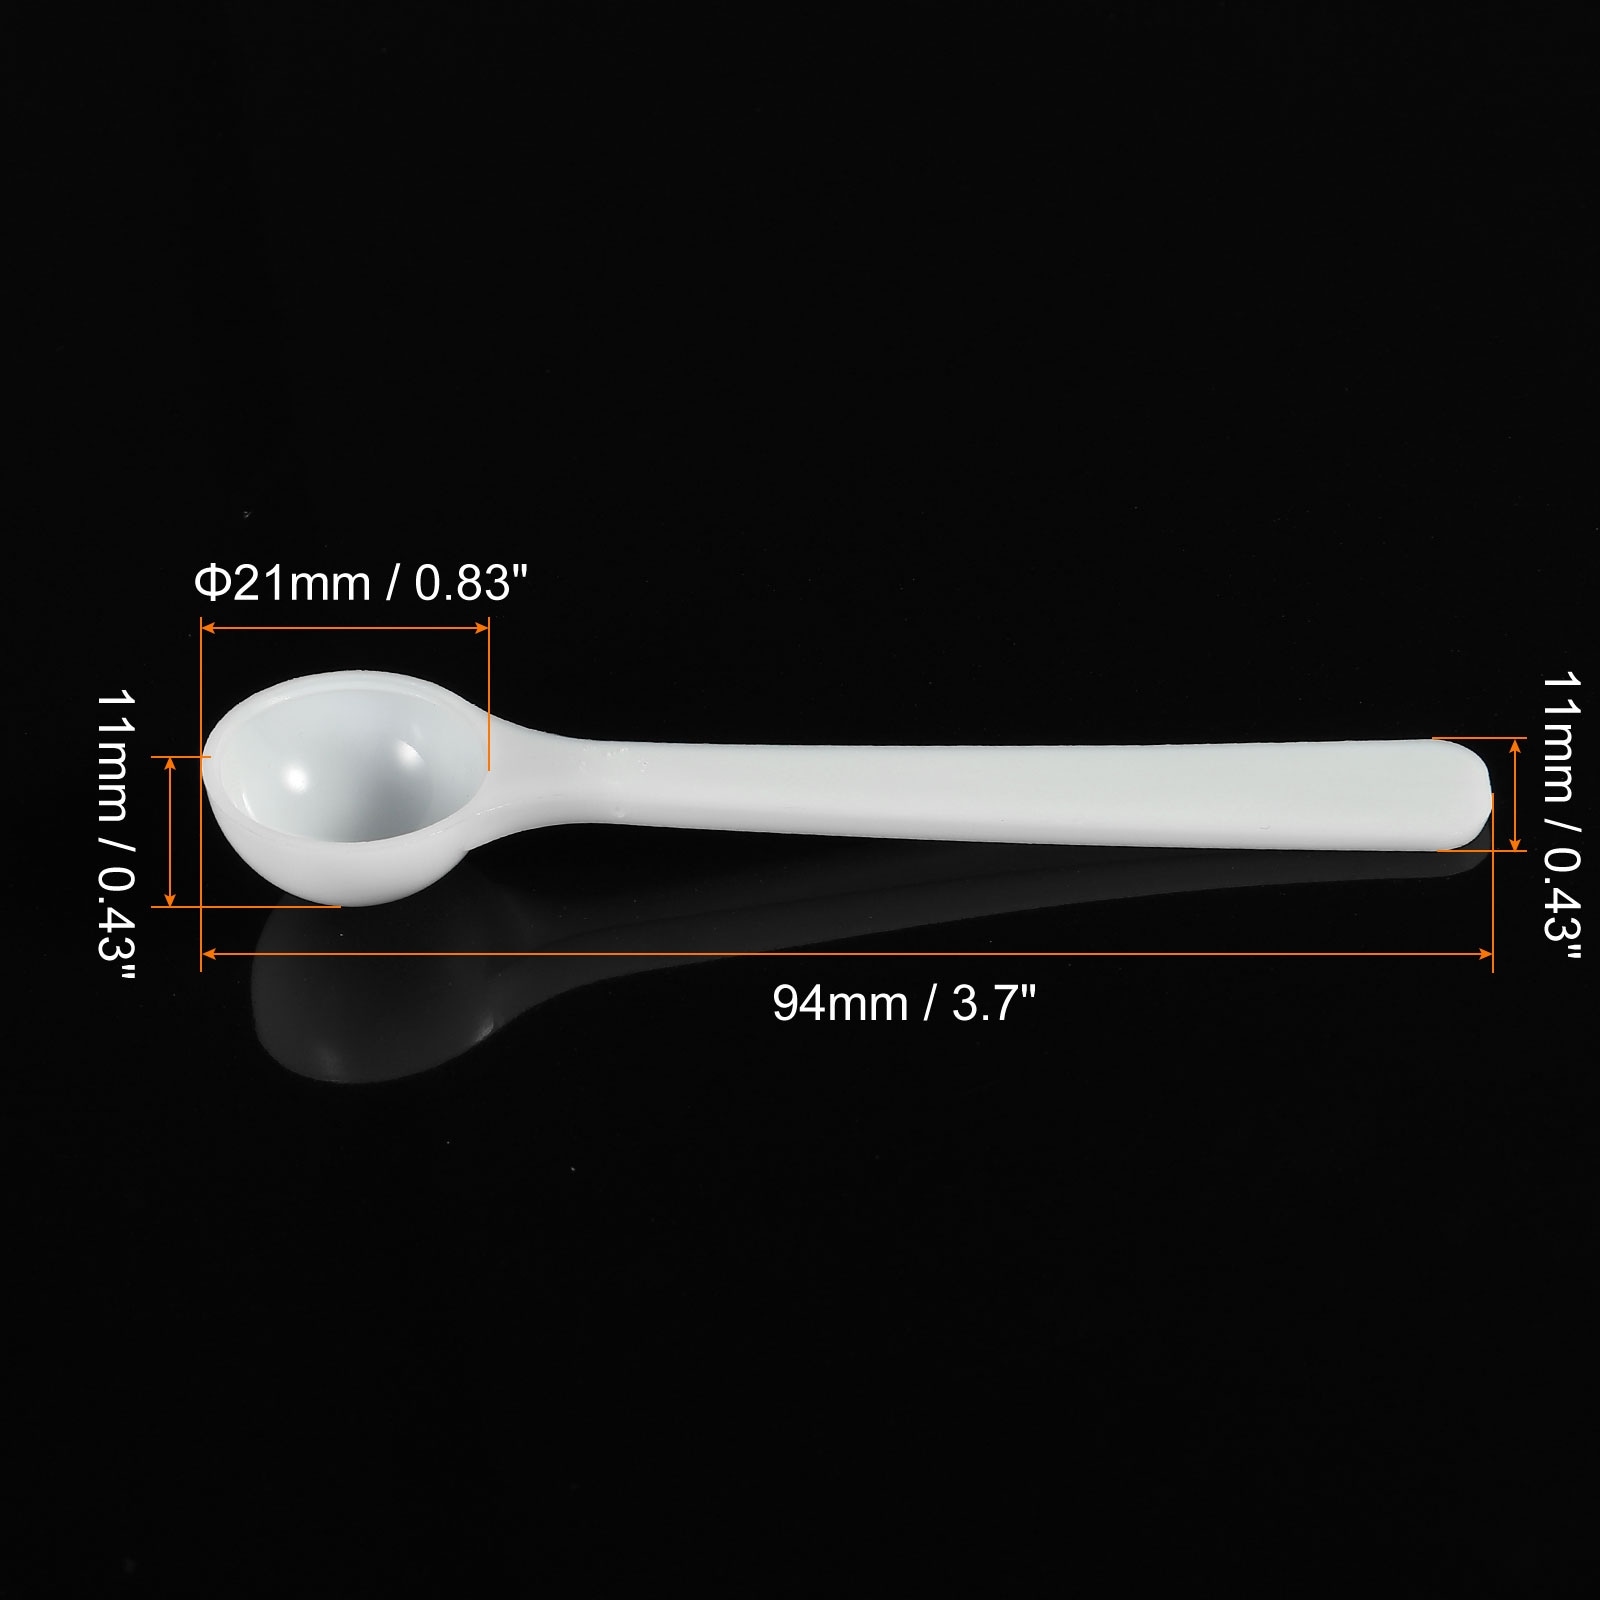 https://ak1.ostkcdn.com/images/products/is/images/direct/5800bb6696e7dbf7972d59a3d5ed485db52a286e/Micro-Spoons-1-Gram-Measuring-Scoop-Plastic-Round-Bottom-Mini-Spoon-50Pcs.jpg